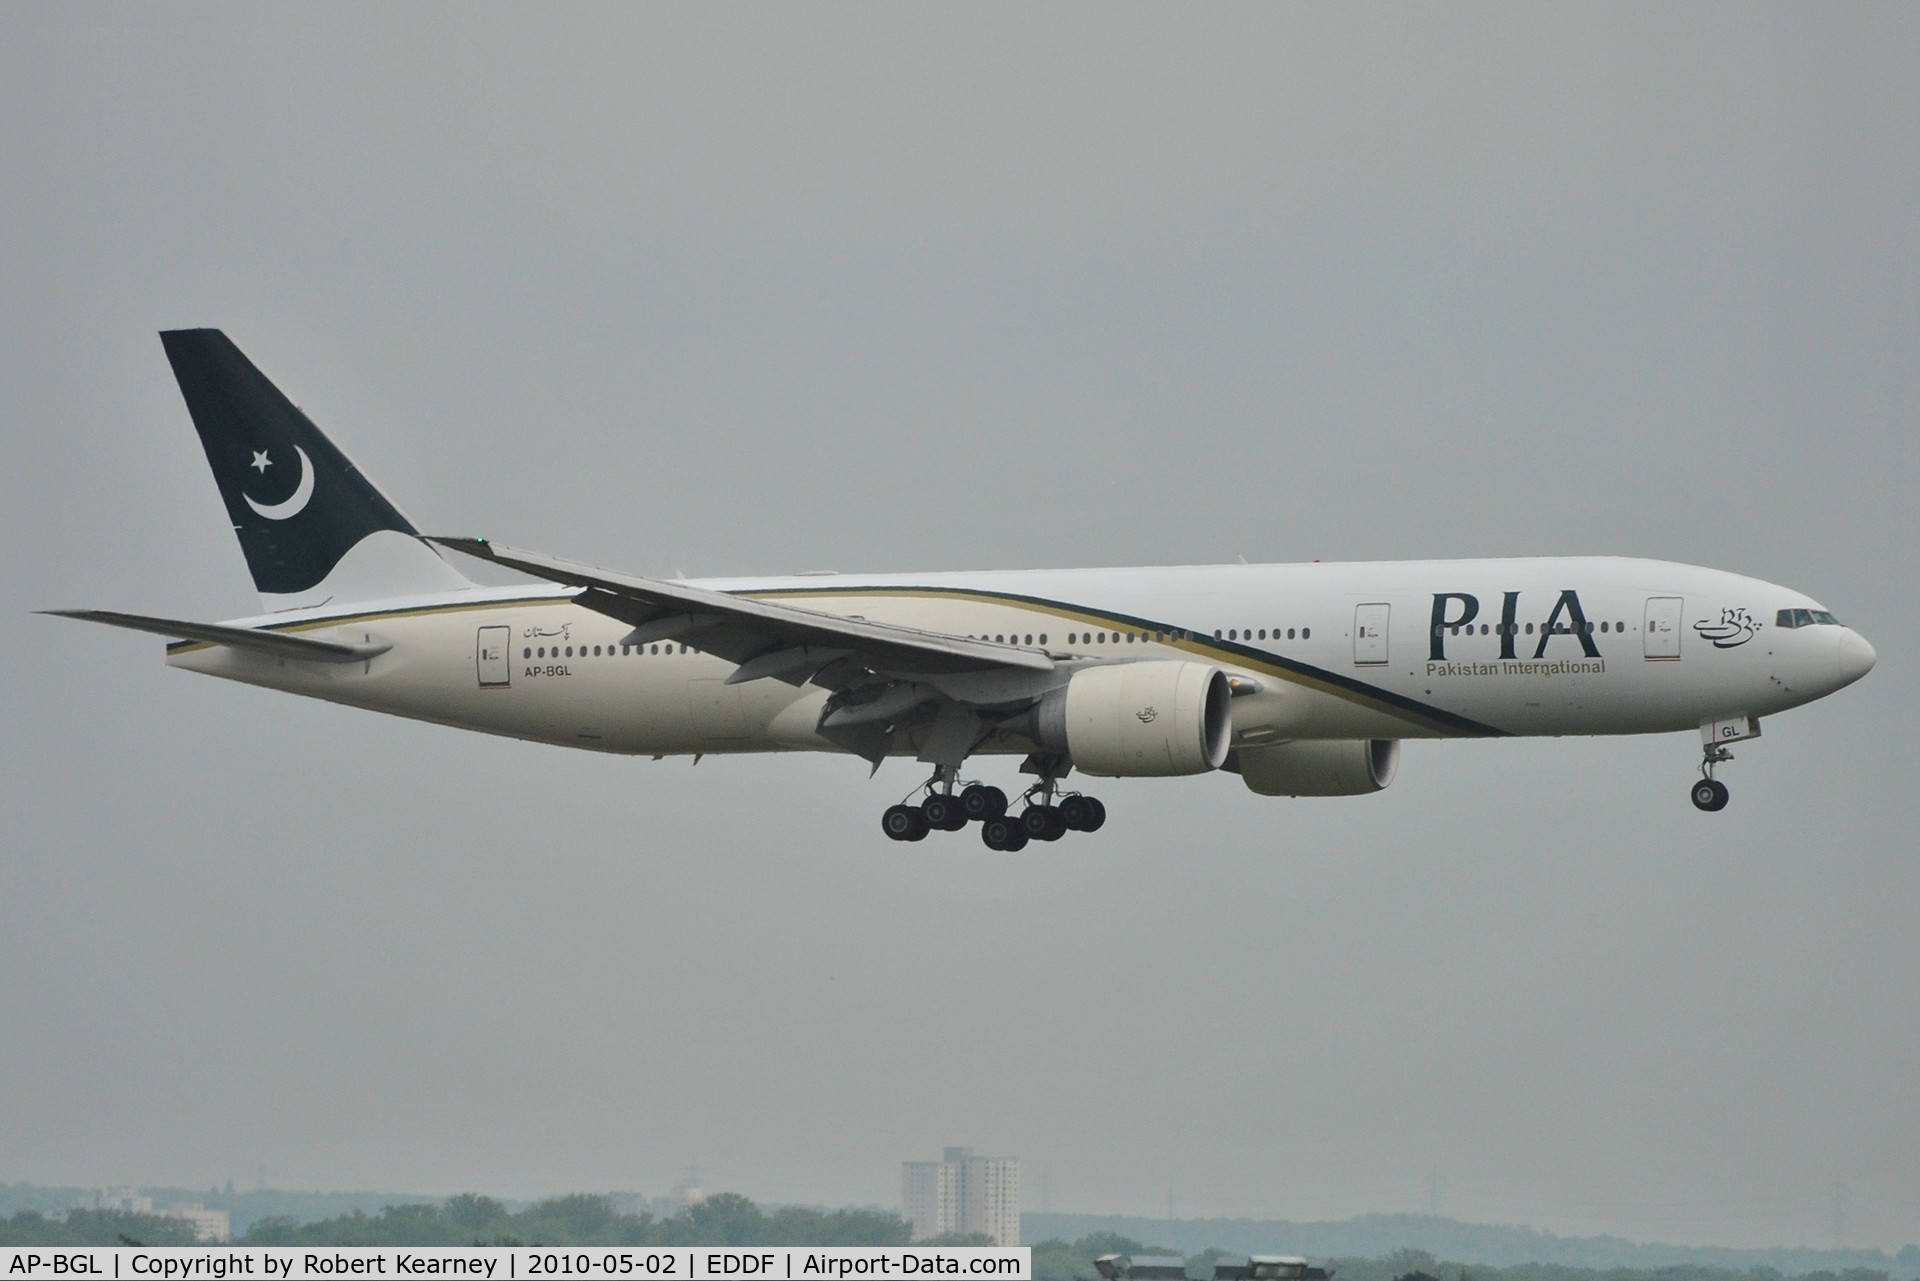 AP-BGL, 2004 Boeing 777-240/ER C/N 33777, PIA about to touch down